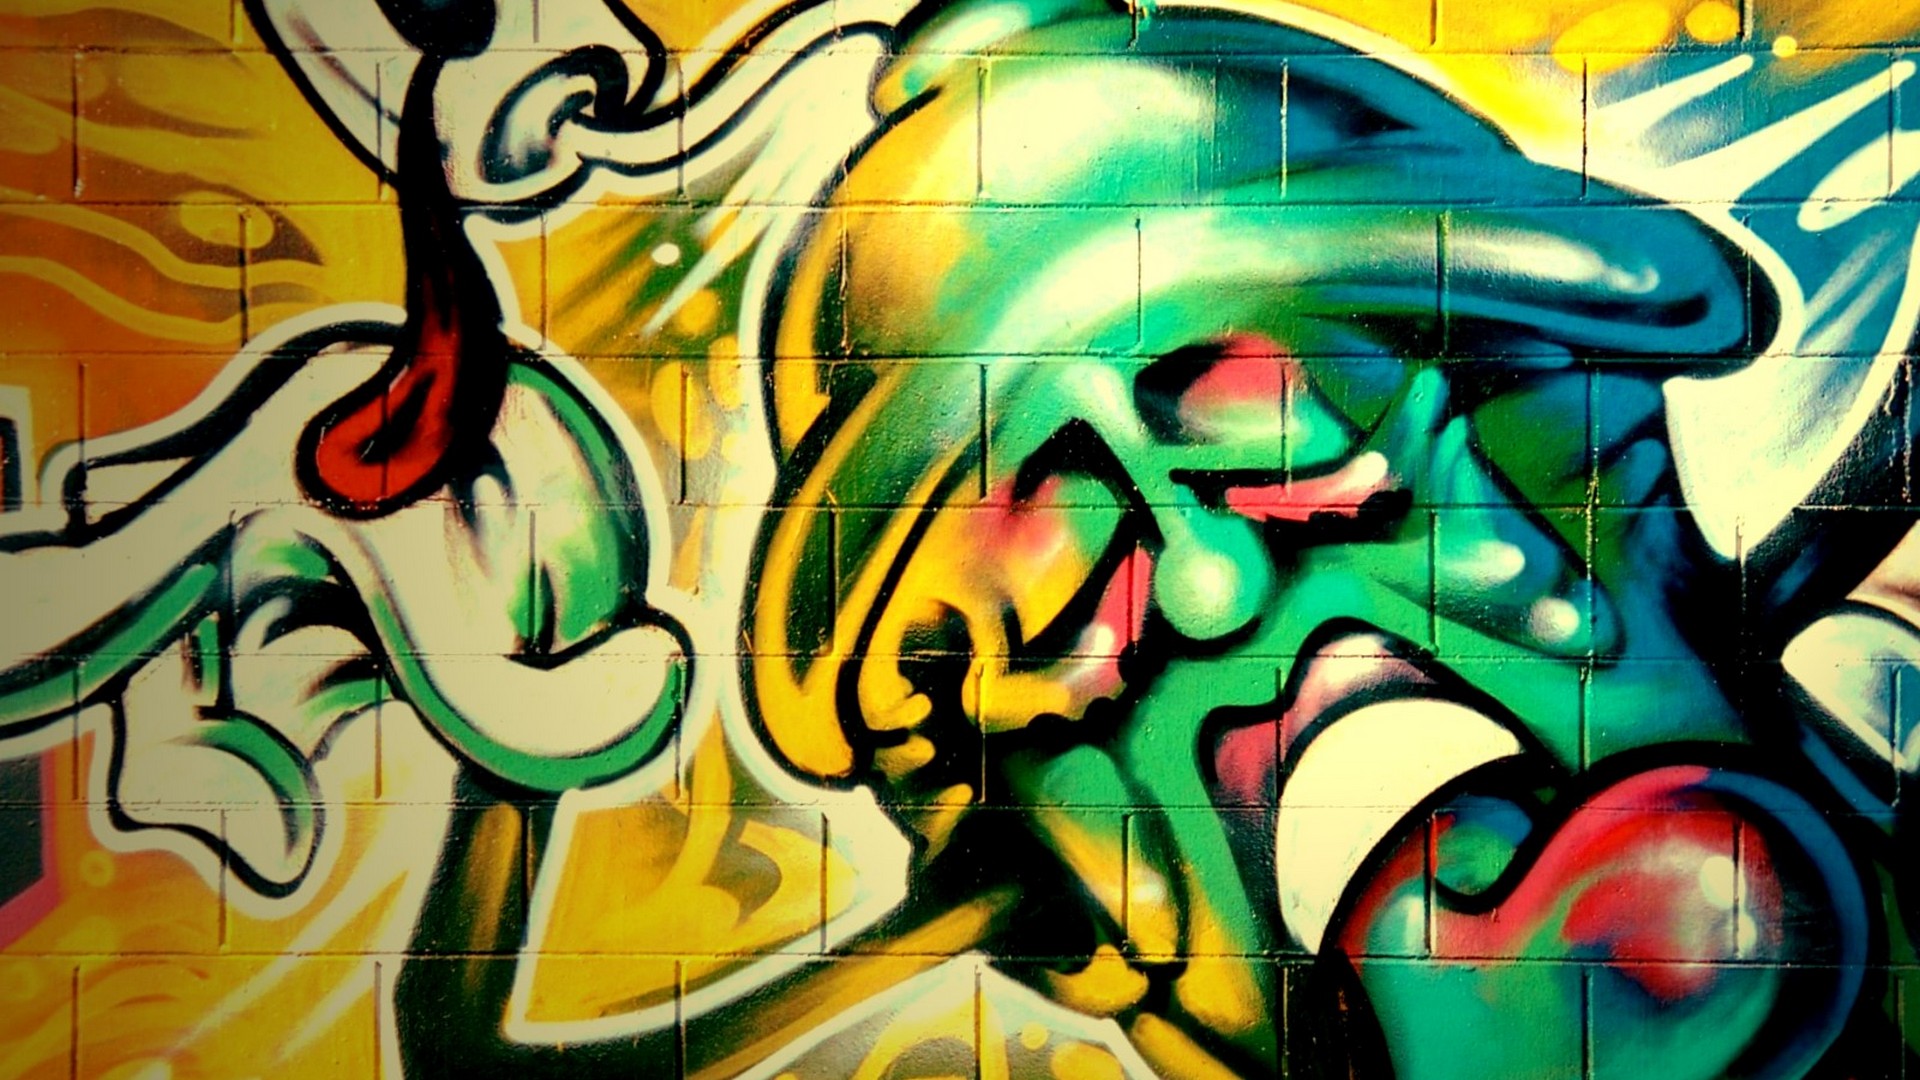 Graffiti Desktop Backgrounds with image resolution 1920x1080 pixel. You can make this wallpaper for your Desktop Computer Backgrounds, Mac Wallpapers, Android Lock screen or iPhone Screensavers